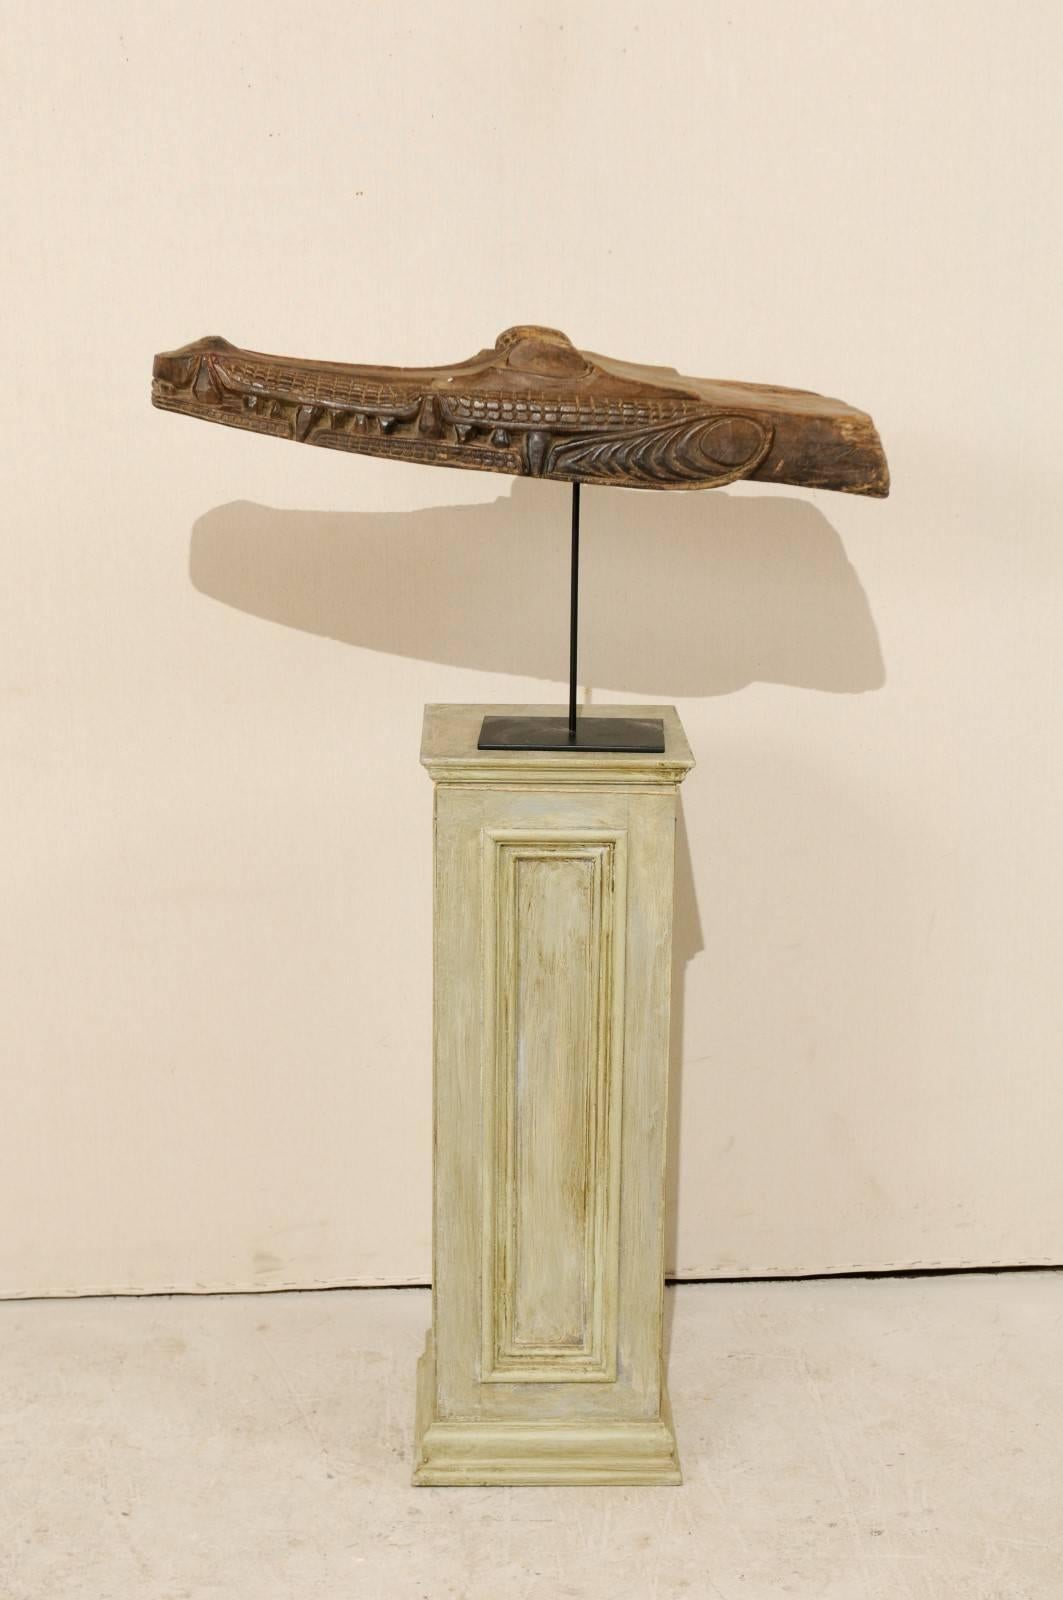 A carved wood crocodile head boat prow from Papua New Guinea. This mid-20th century Papua New Guinean boat prow has been carved out of wood and features the head of a crocodile. This boat prow is displayed on a custom black iron stand. The carvings